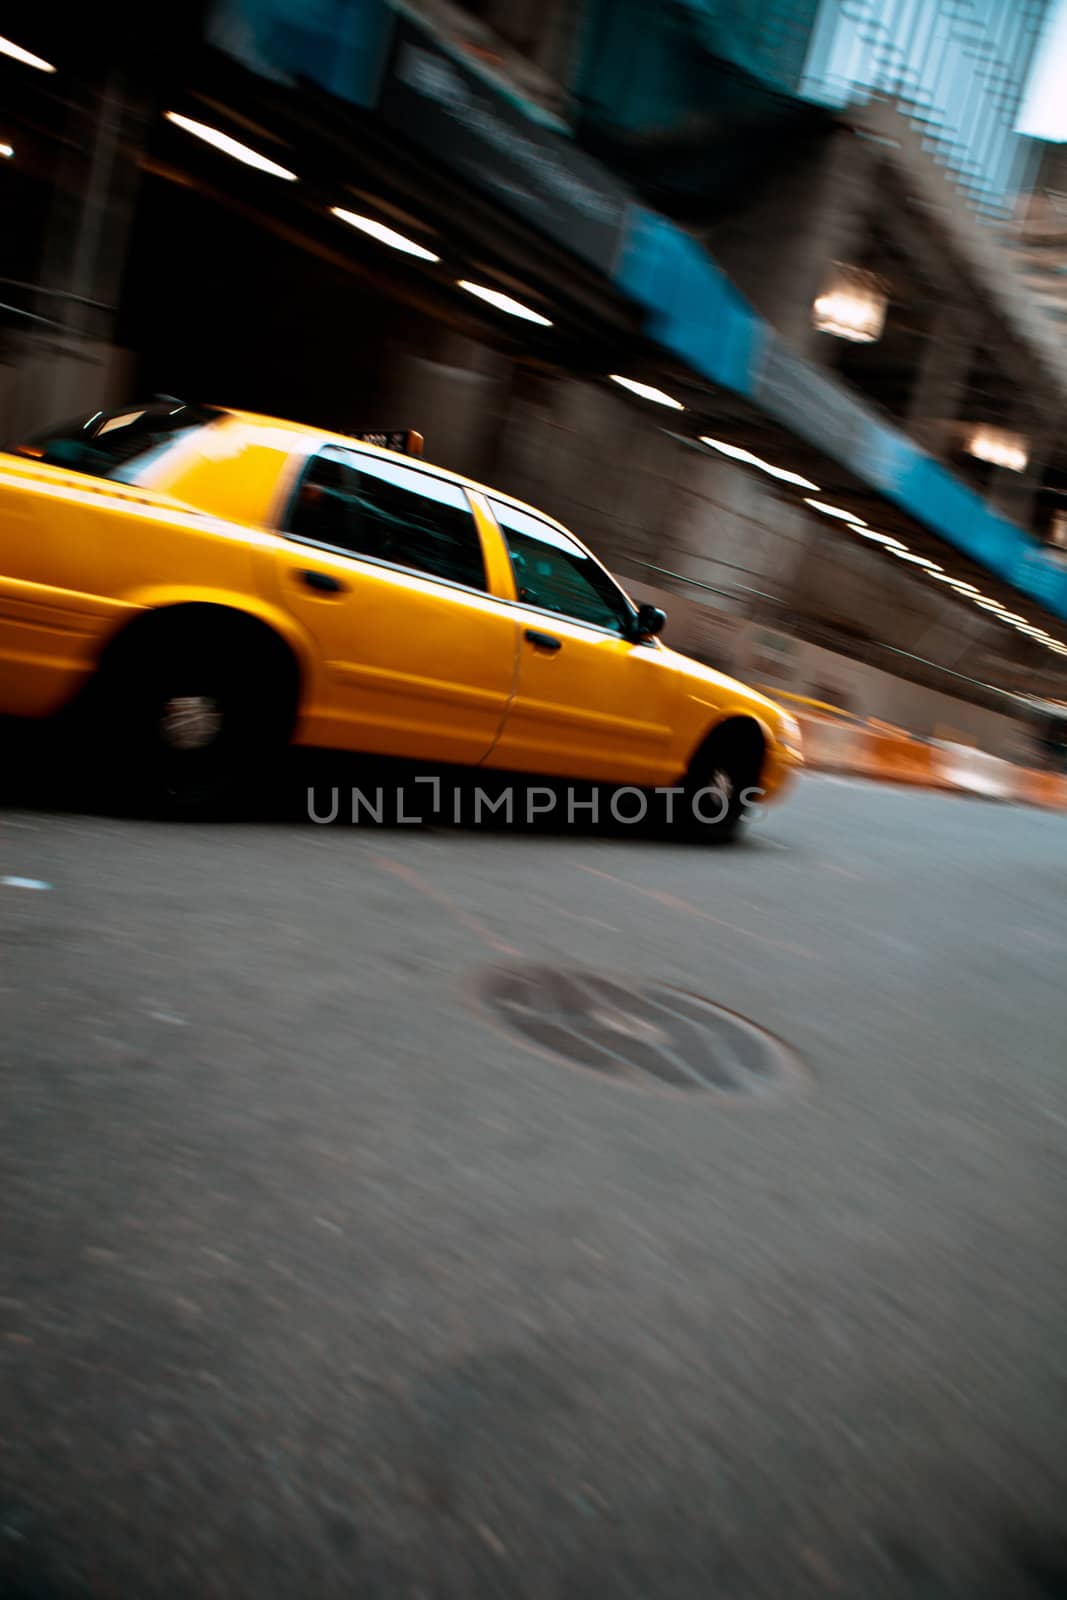 Pnned motion blur of a city street scene with a yellow taxi cab speeding by. 